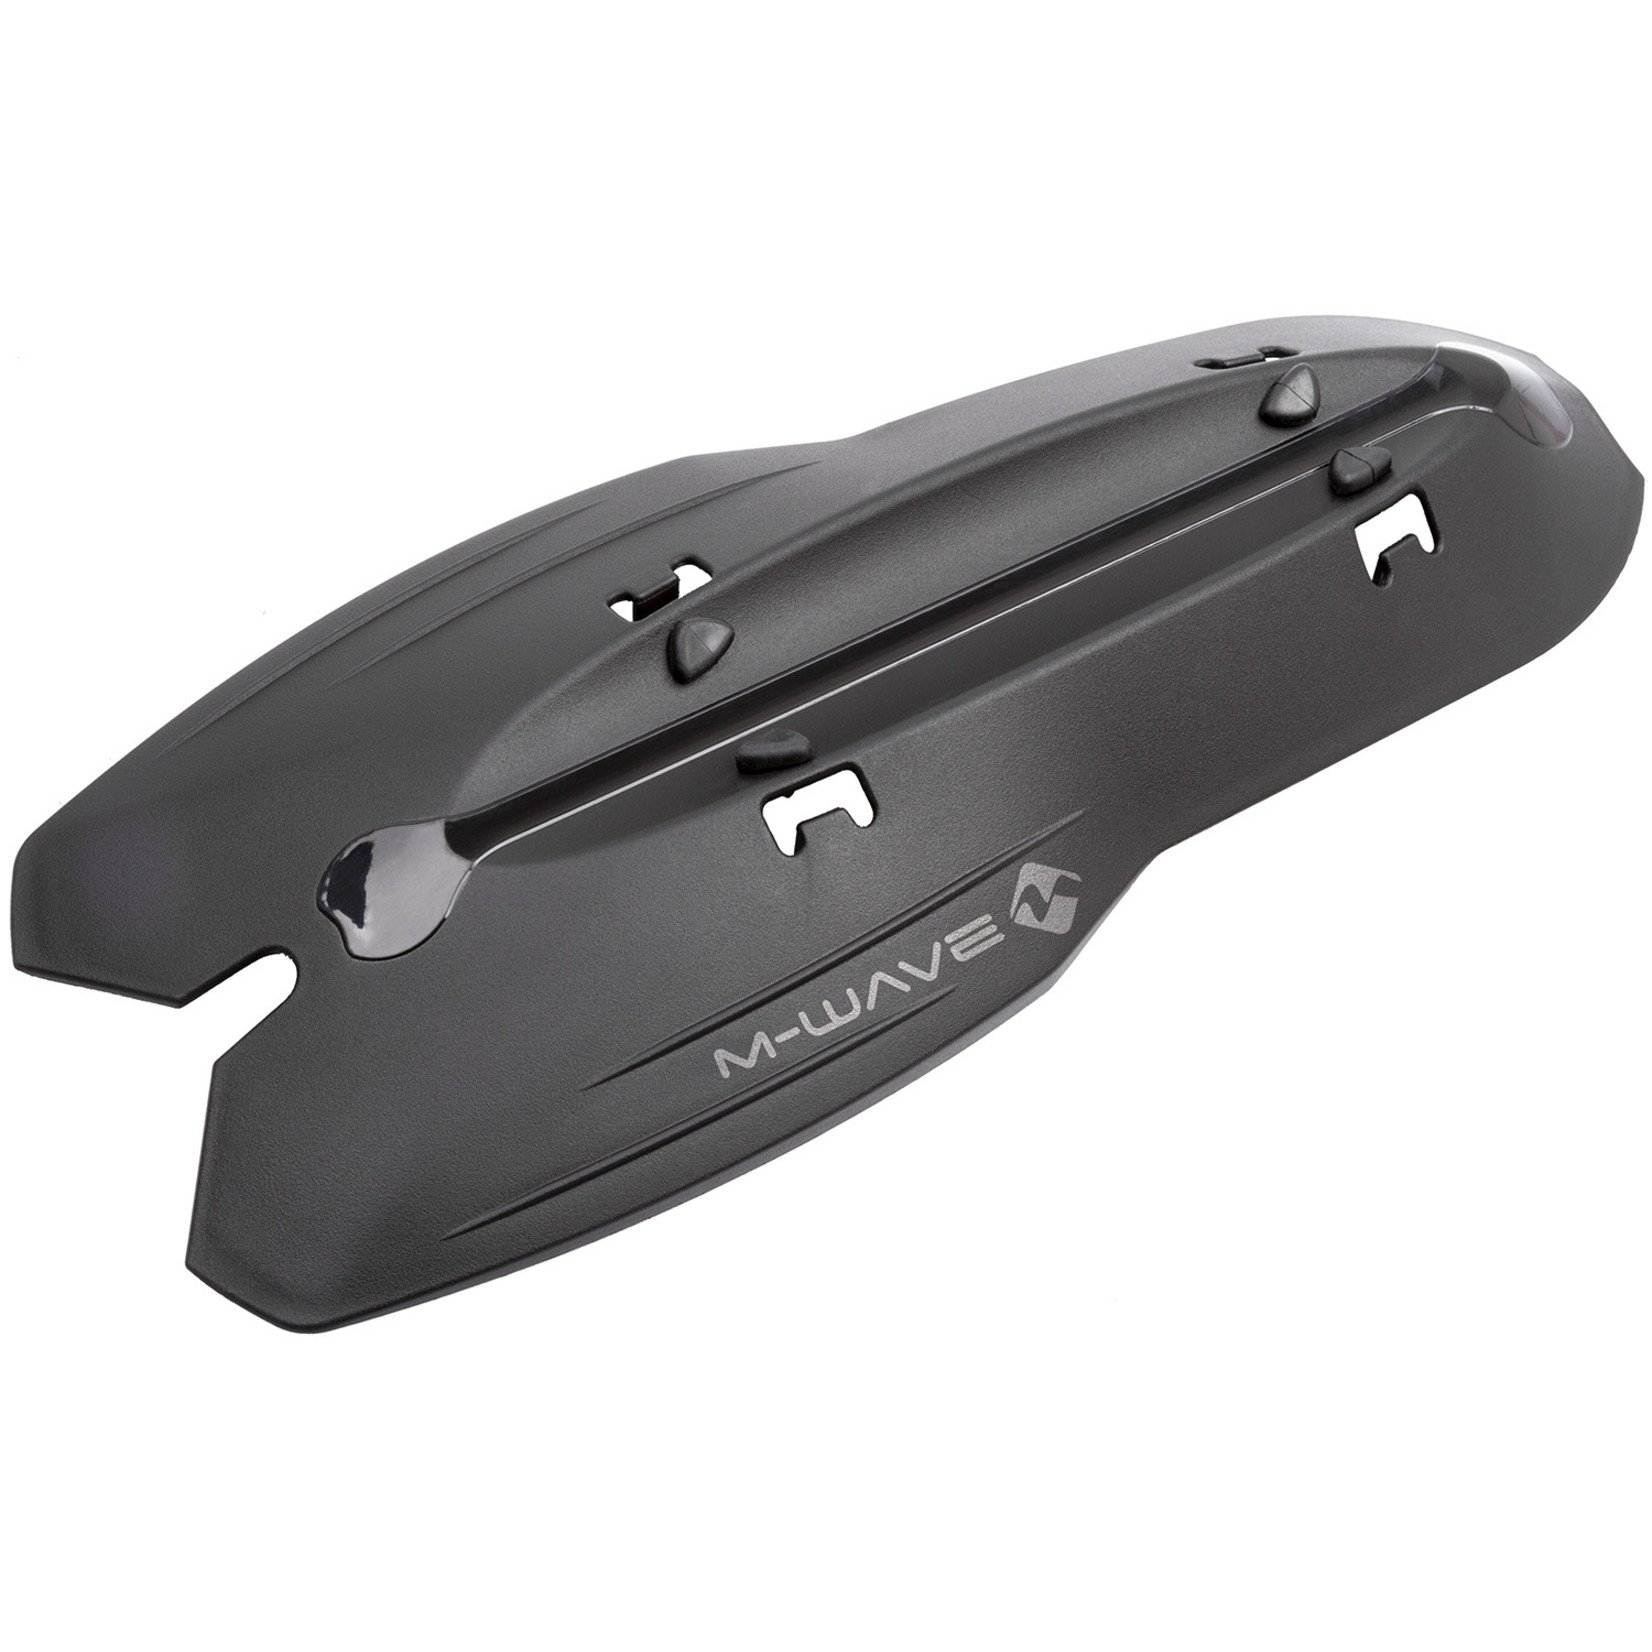 M-Wave  MUD MAX DT Mudguard for Downtube